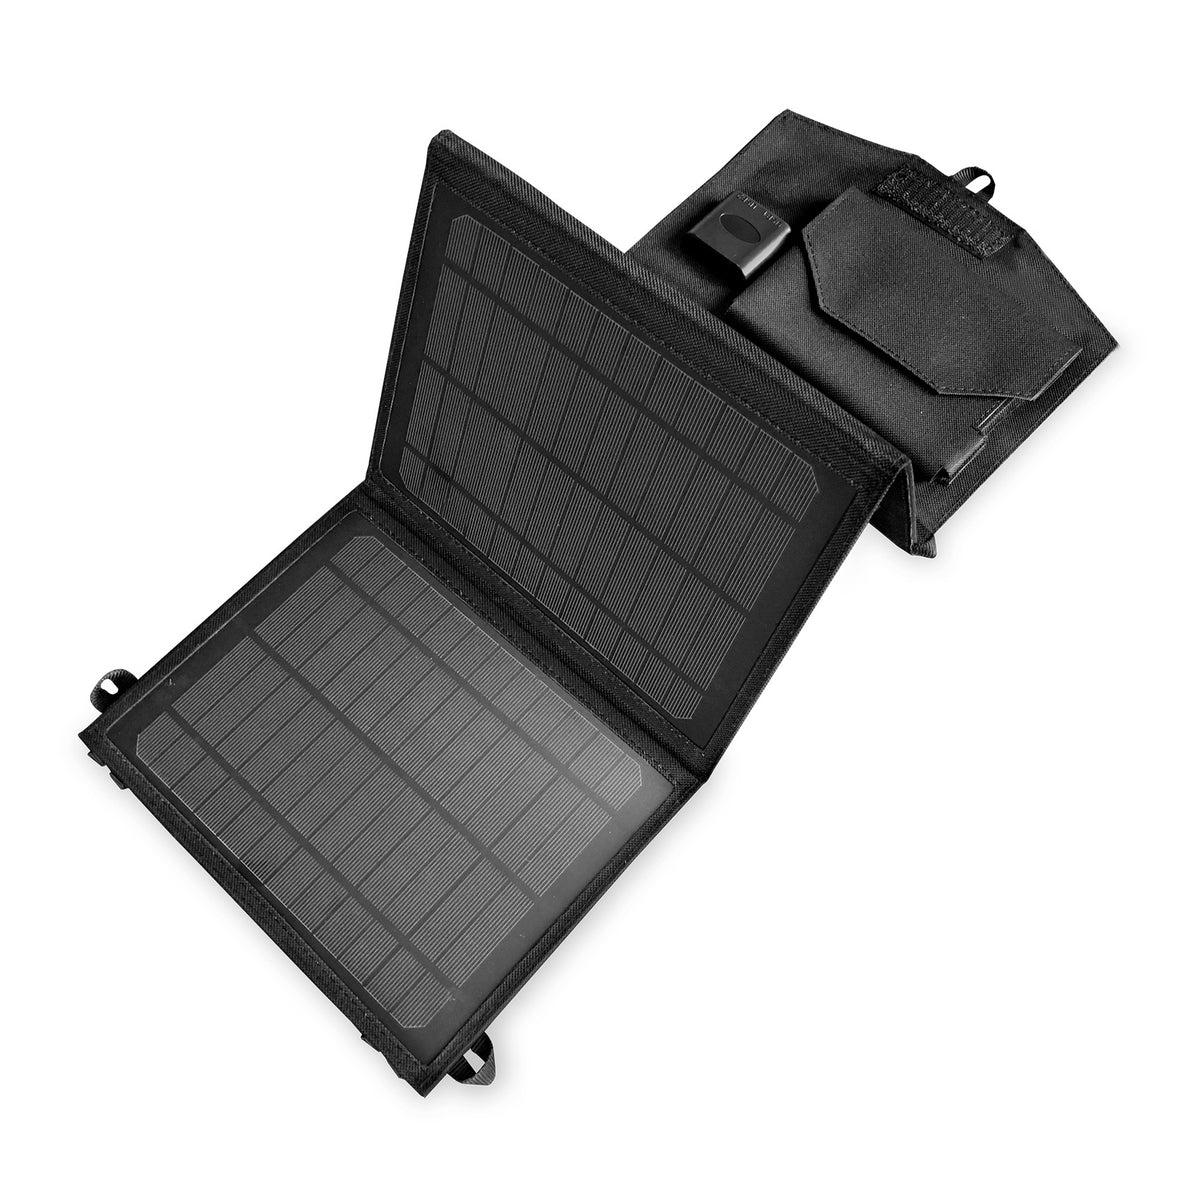 Celly USB Solar Charger with 2x USB Ports 10W